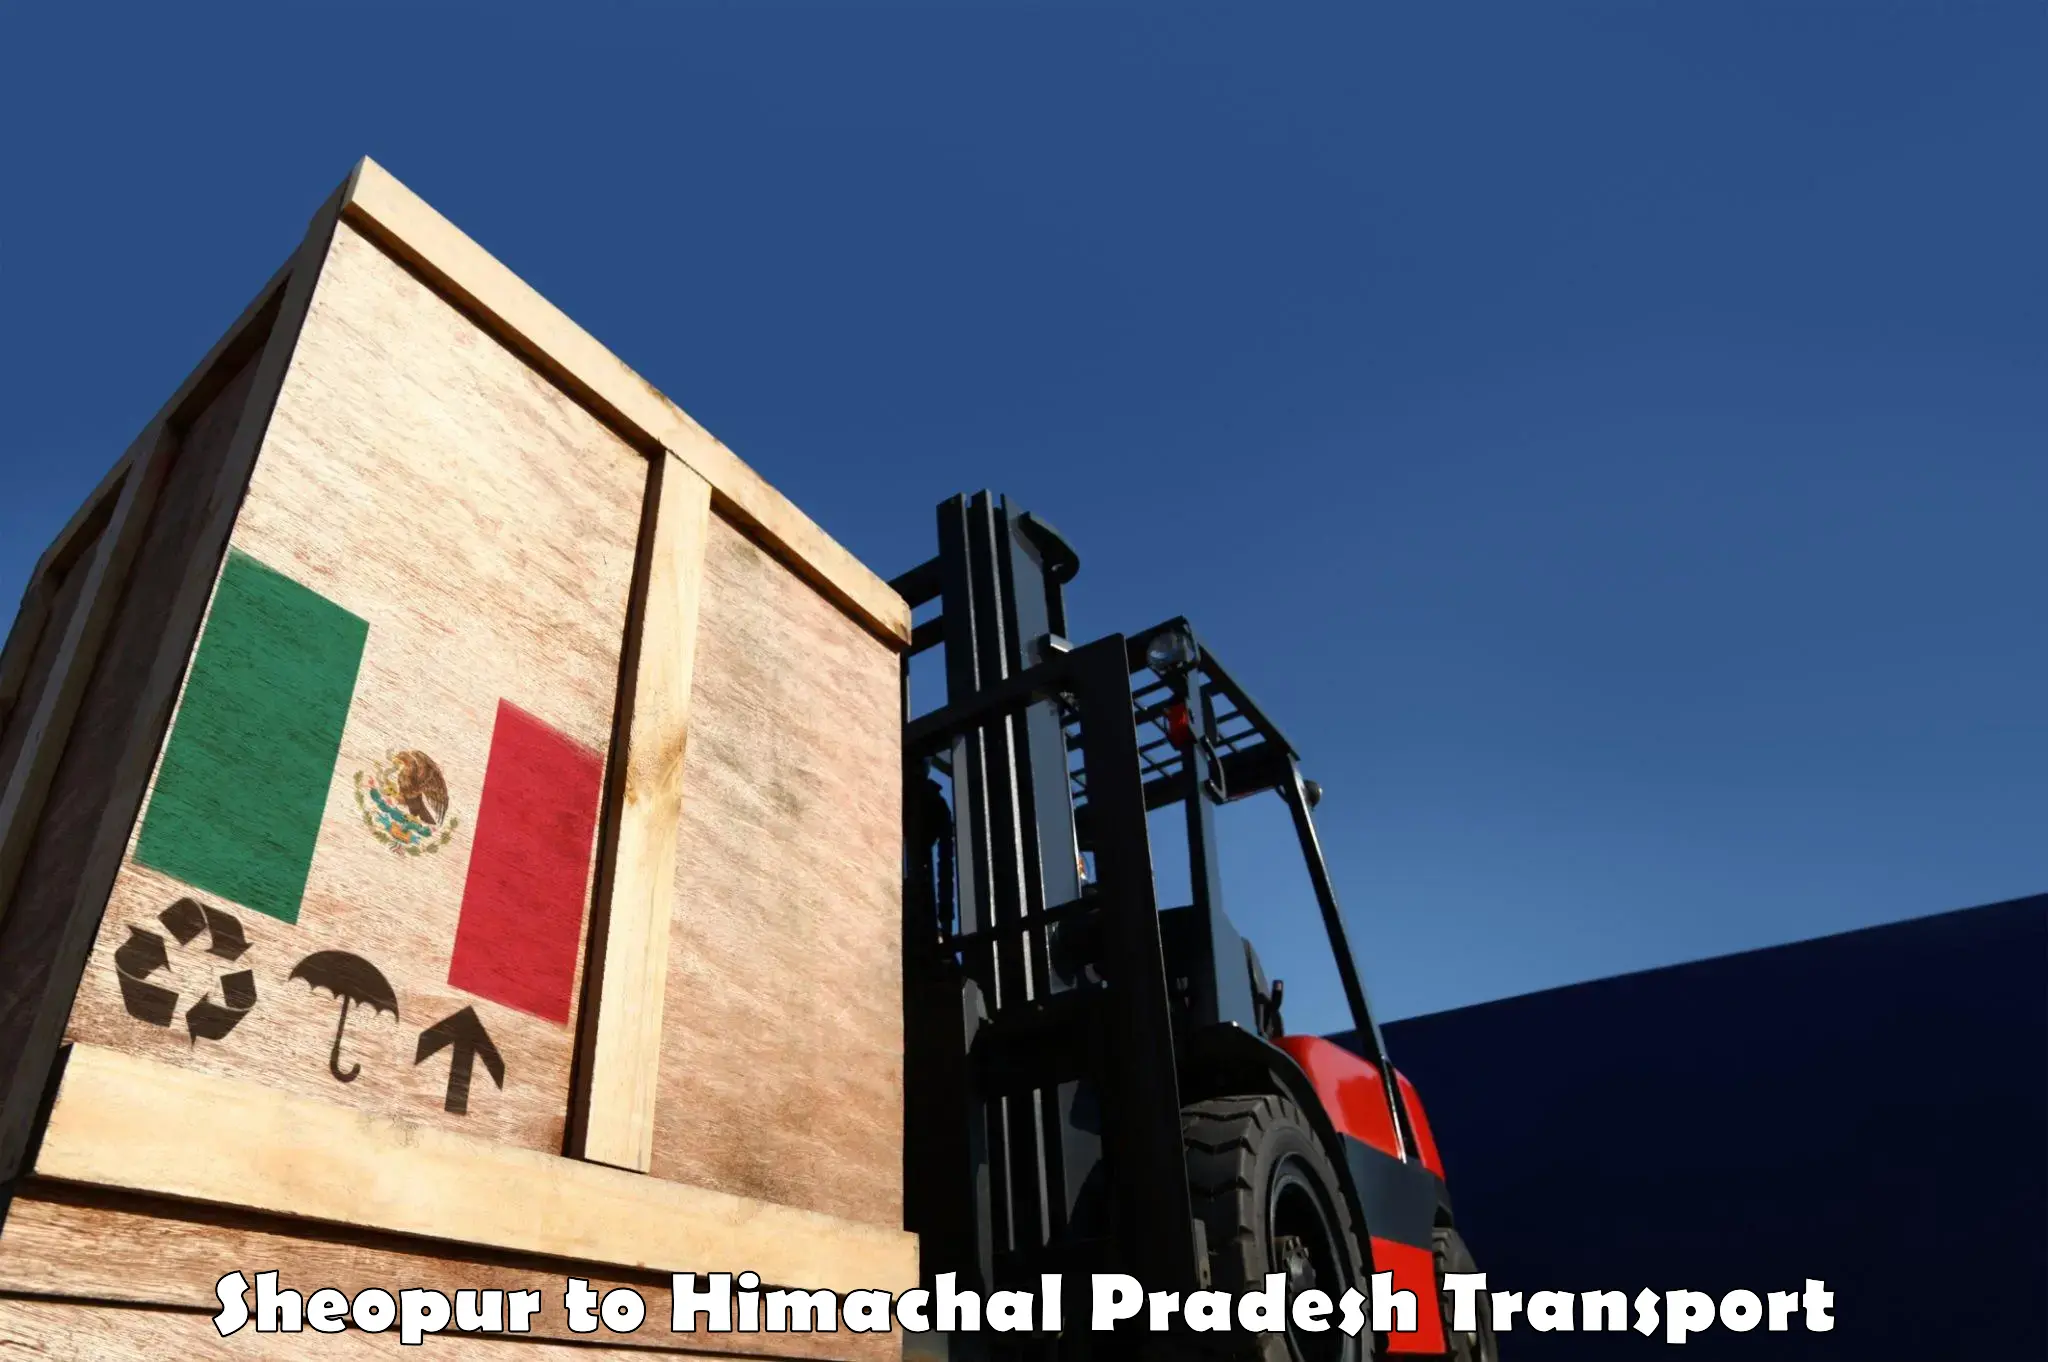 Truck transport companies in India Sheopur to Dharampur Kasauli